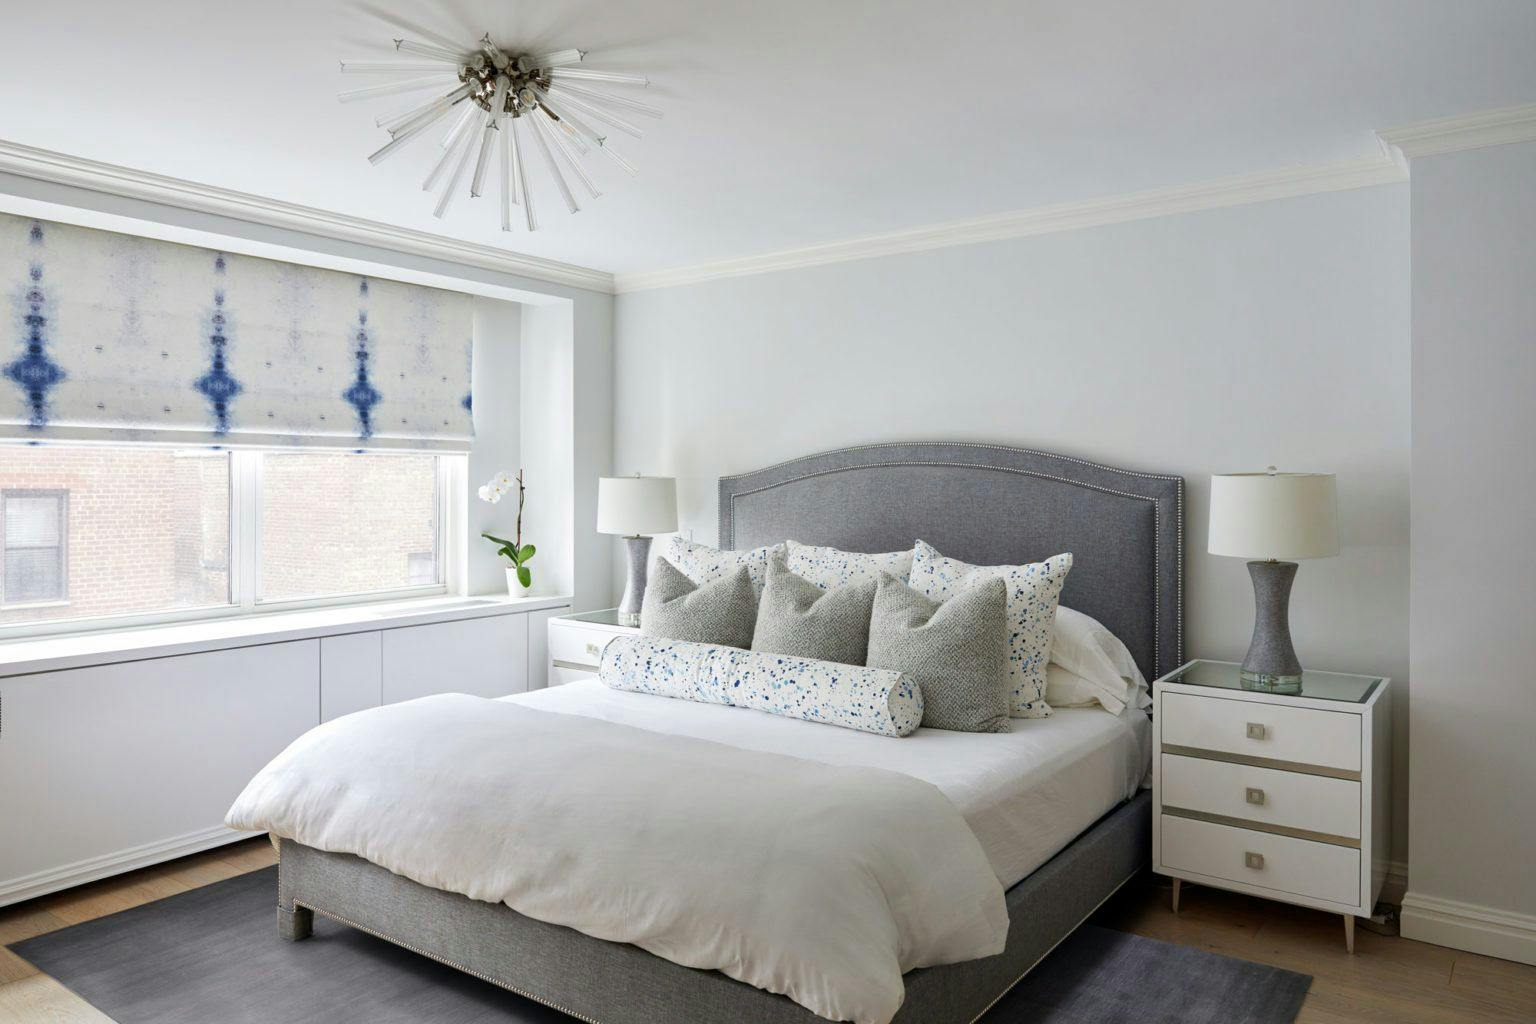 70th street bedroom with gray tones and blue acccents